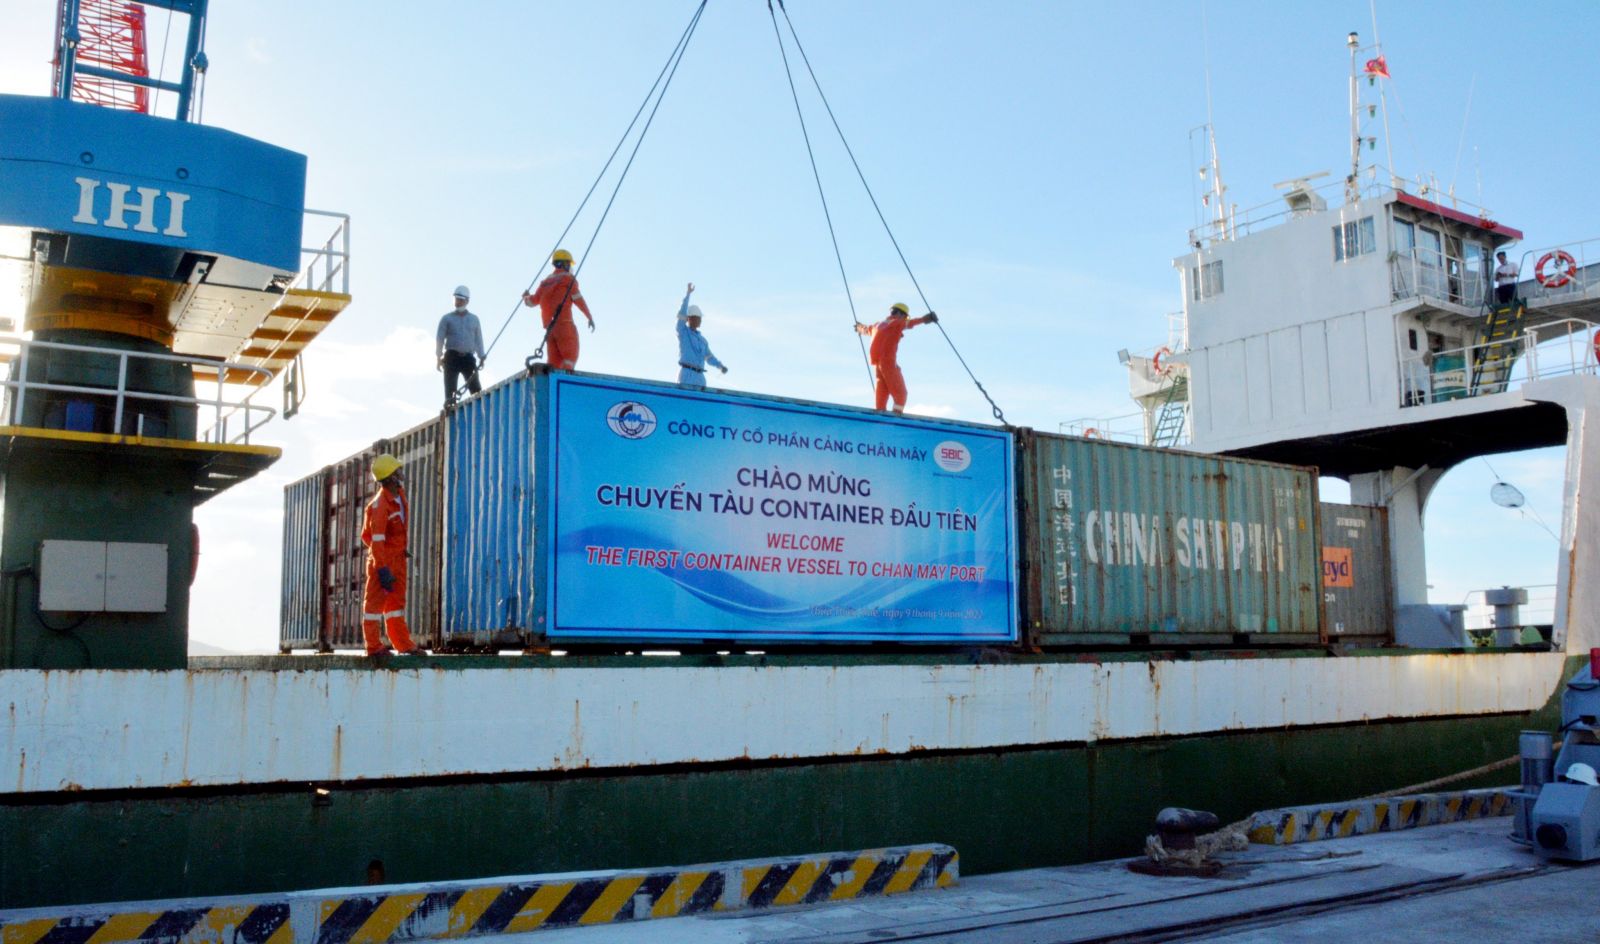 The first container being unloaded at the port